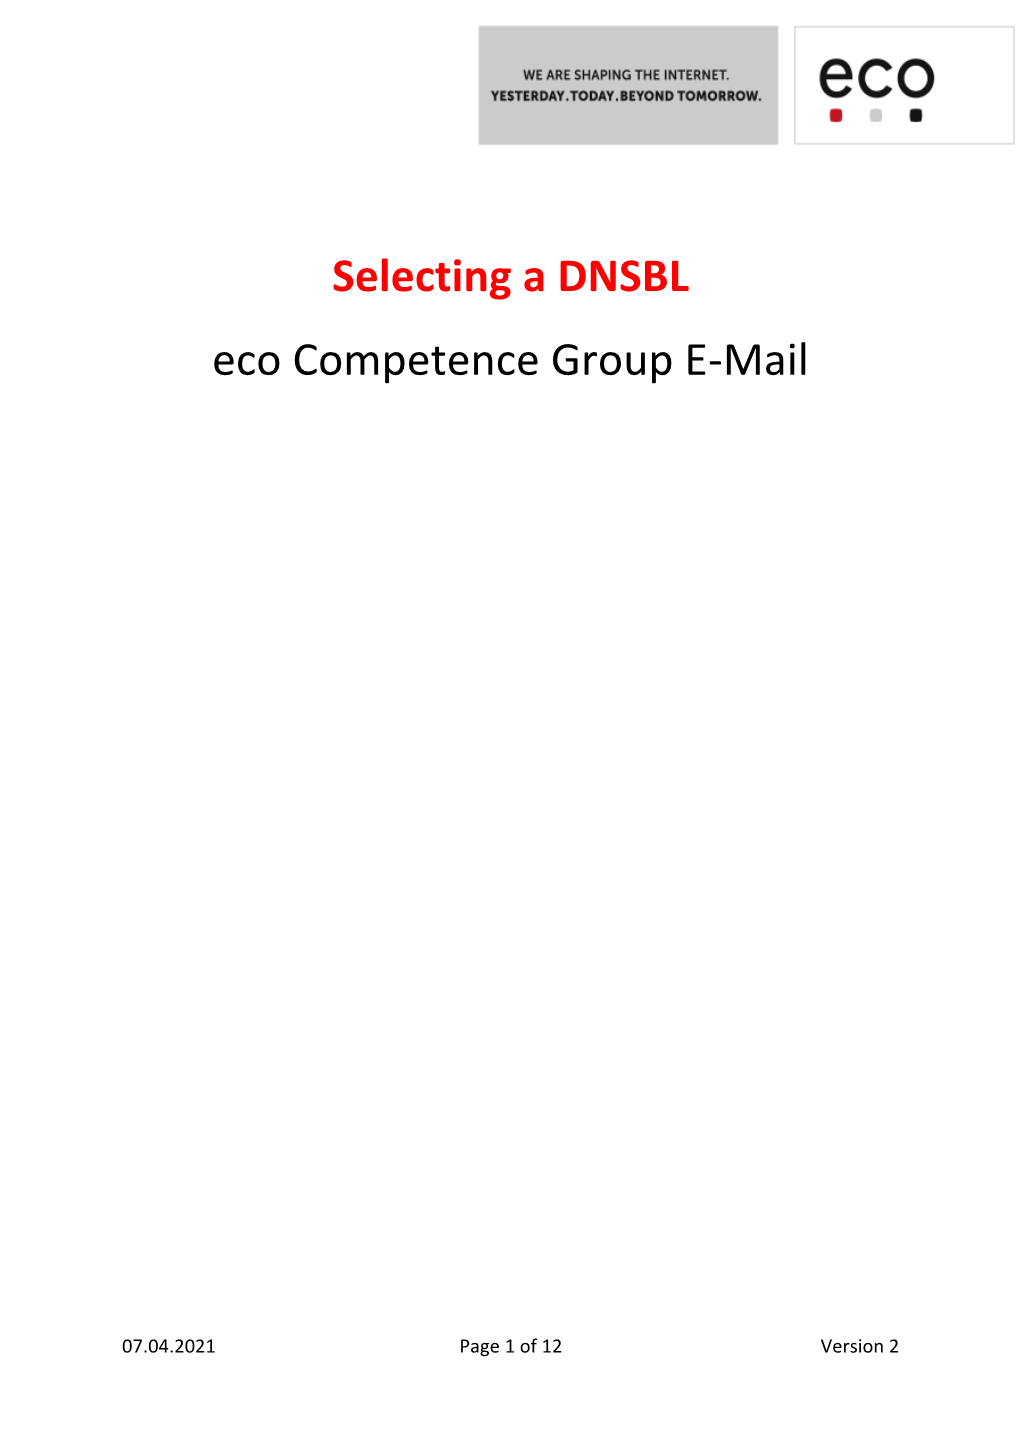 Selecting a DNSBL Eco Competence Group E-Mail